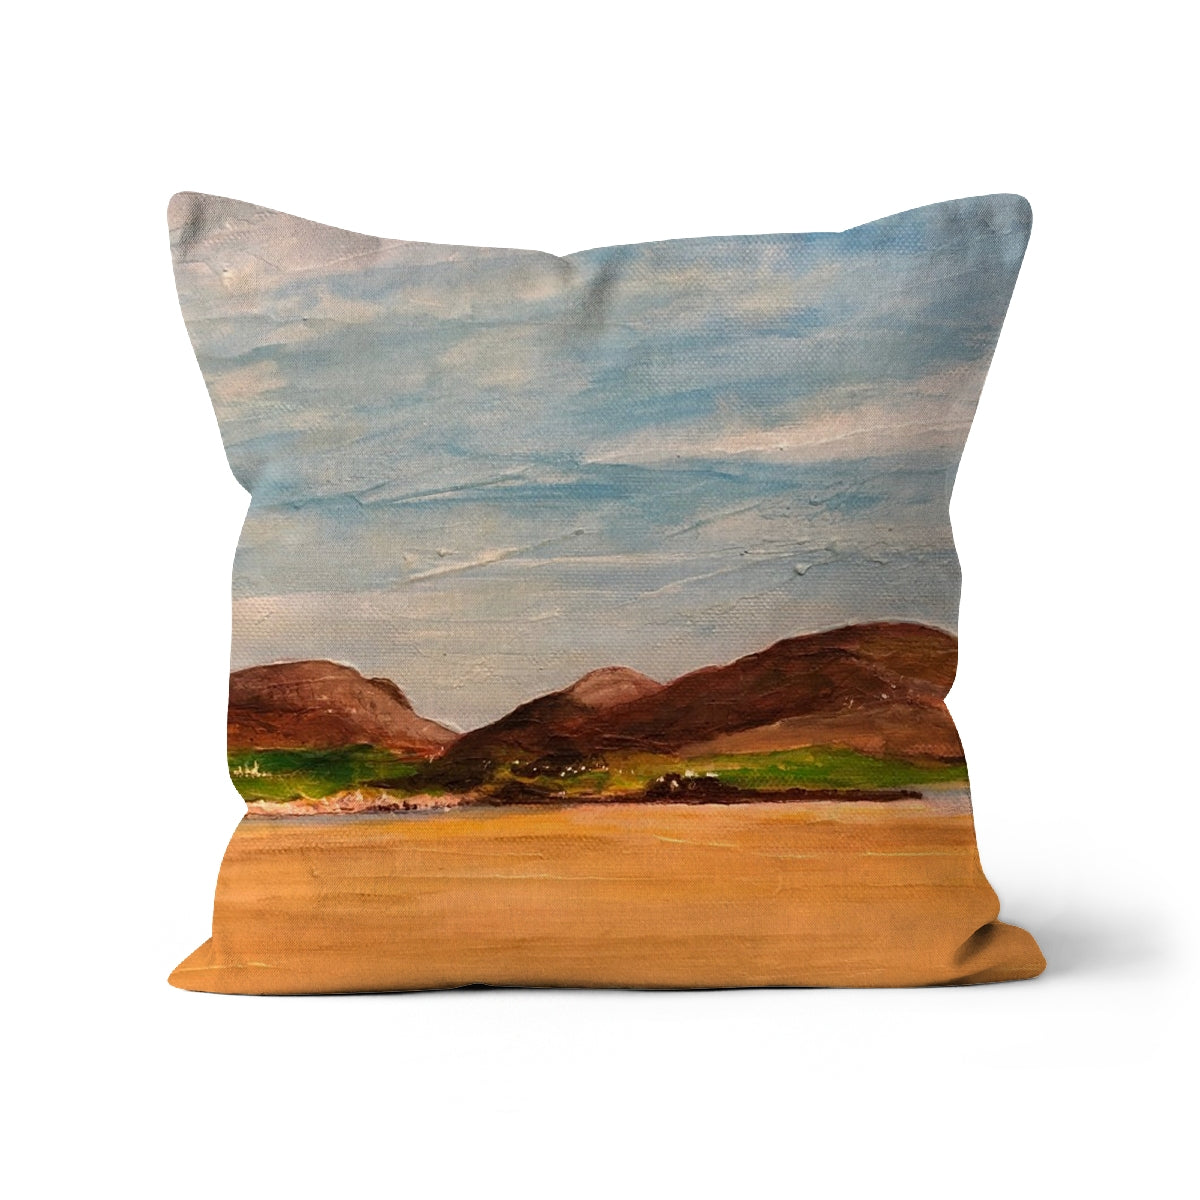 Uig Sands Lewis Art Gifts Cushion-Cushions-Hebridean Islands Art Gallery-Canvas-24"x24"-Paintings, Prints, Homeware, Art Gifts From Scotland By Scottish Artist Kevin Hunter